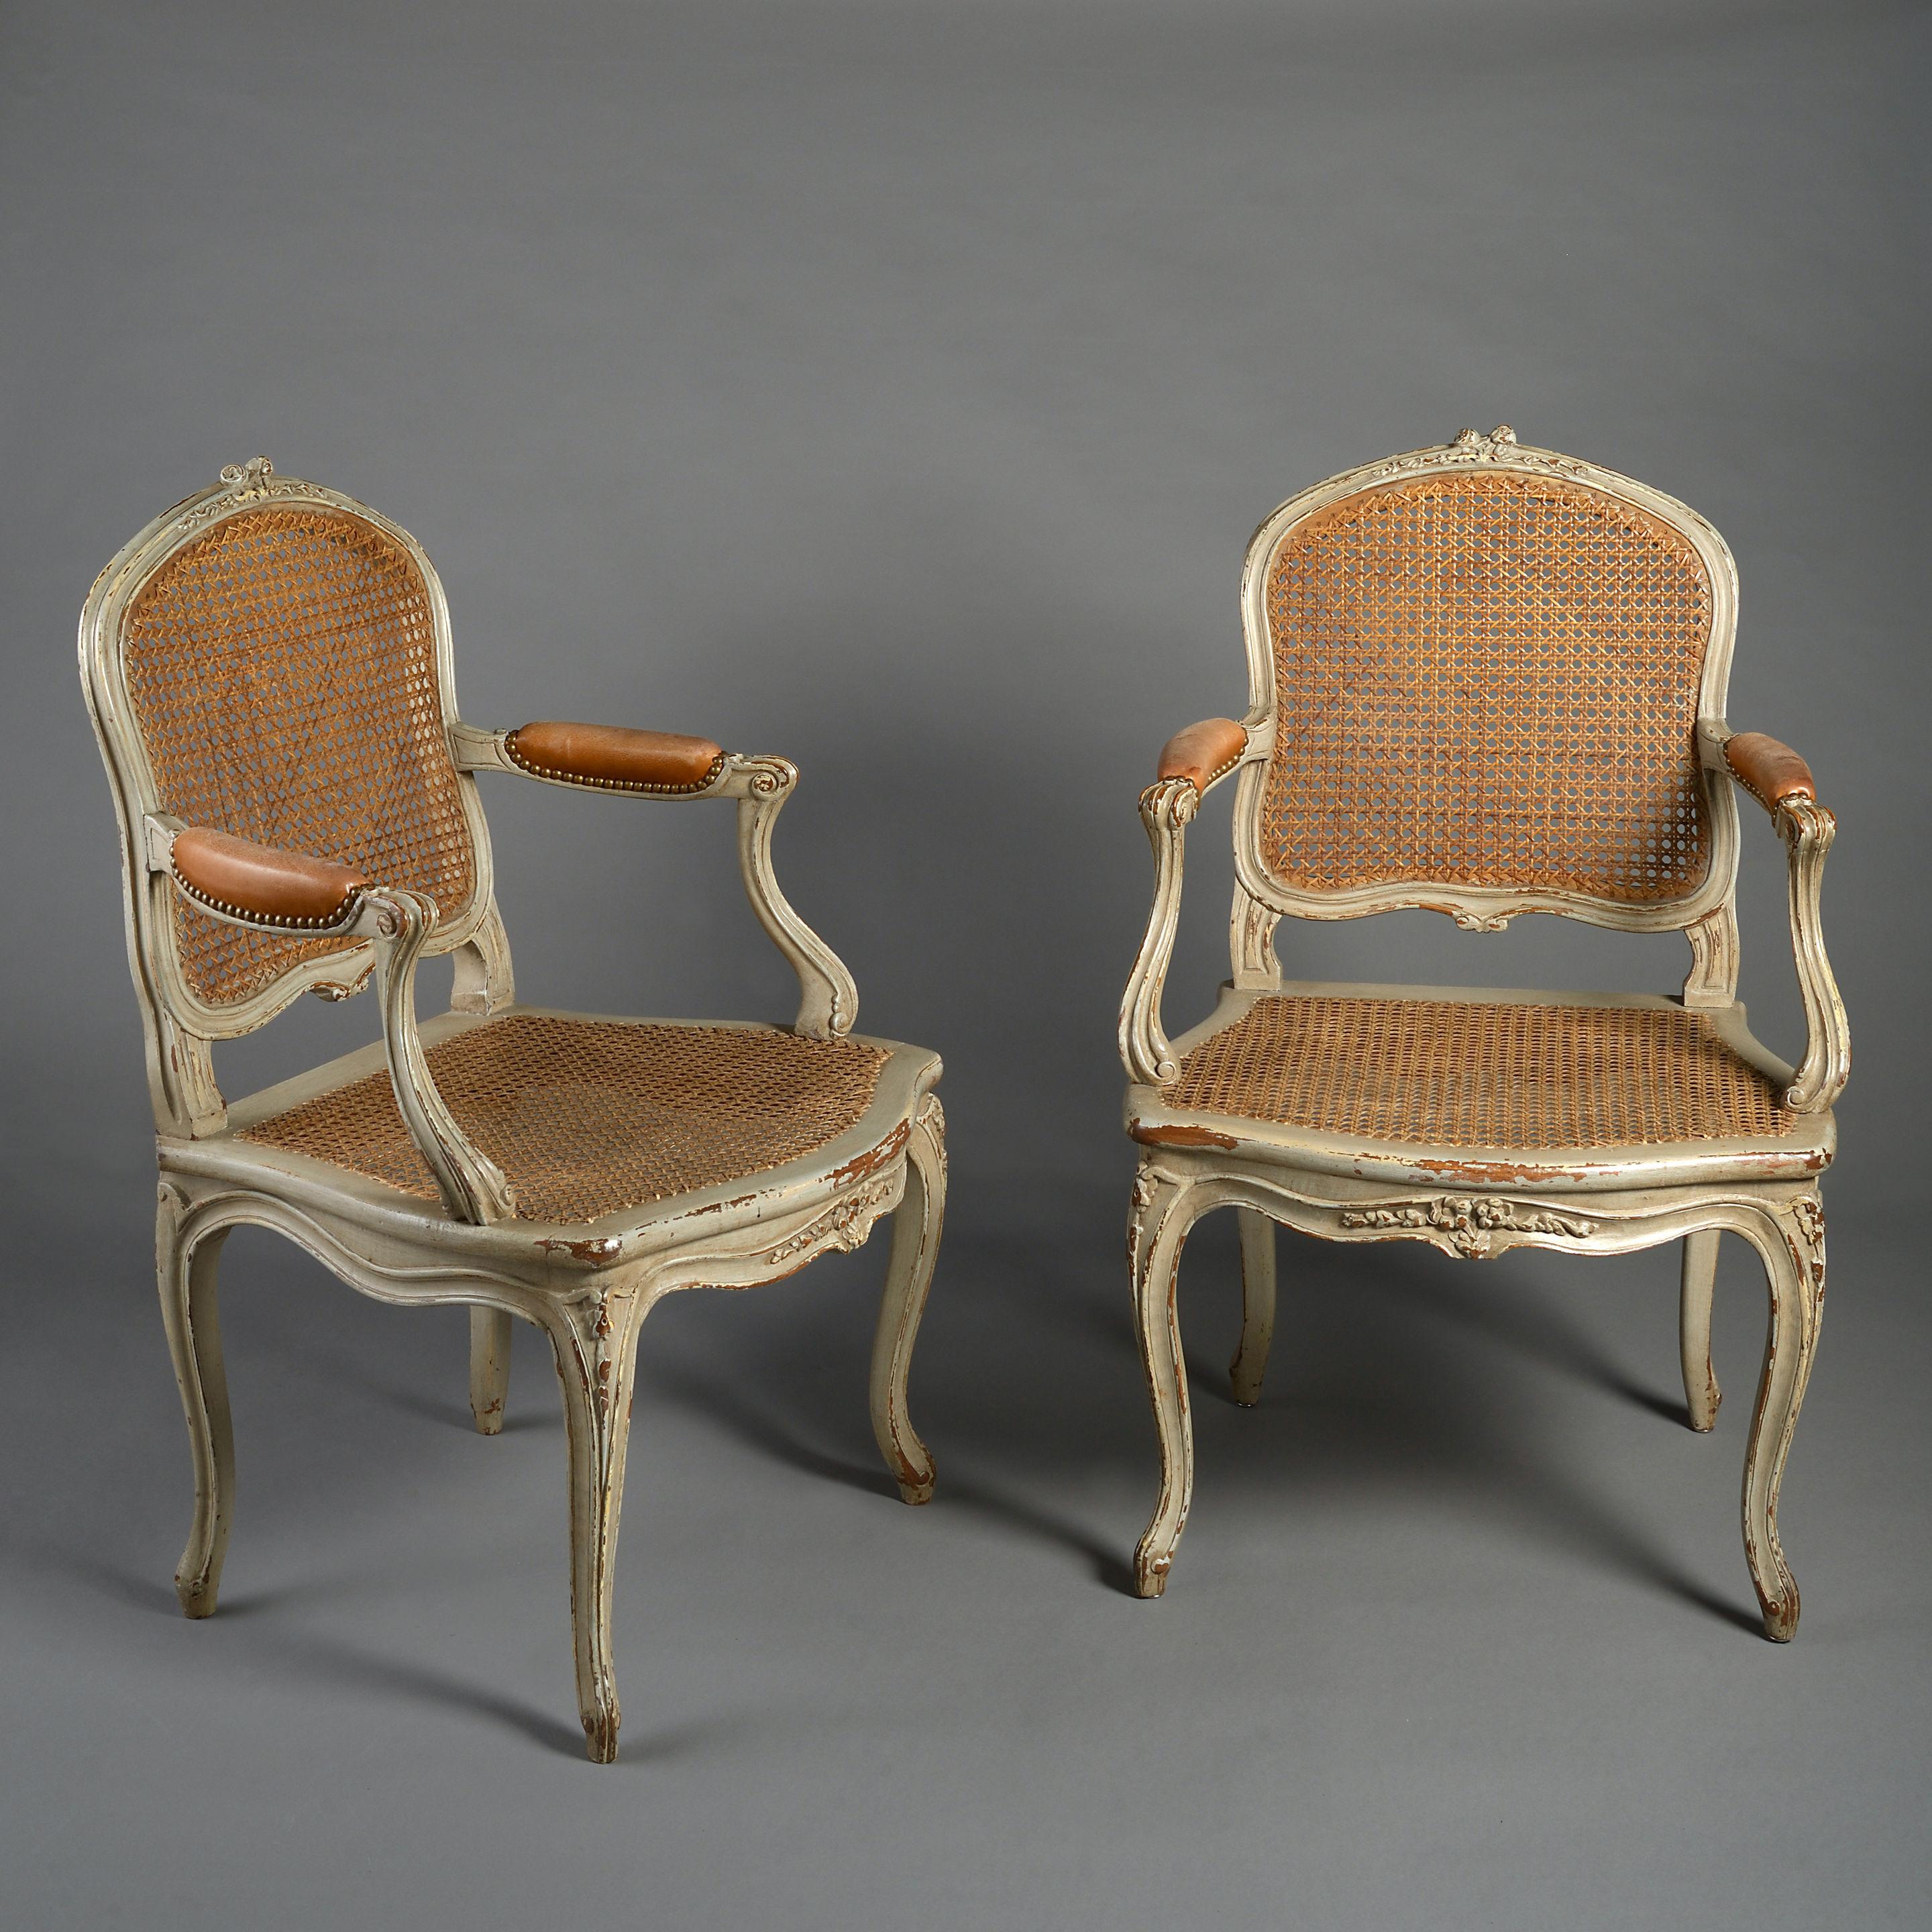 A pair of late 19th century painted fauteuil in the Luis XV manner having cartouche backs, scrolling arms, shaped seats, alternating On cabriole legs, having cane work throughout. Now with drop-in squab seats.